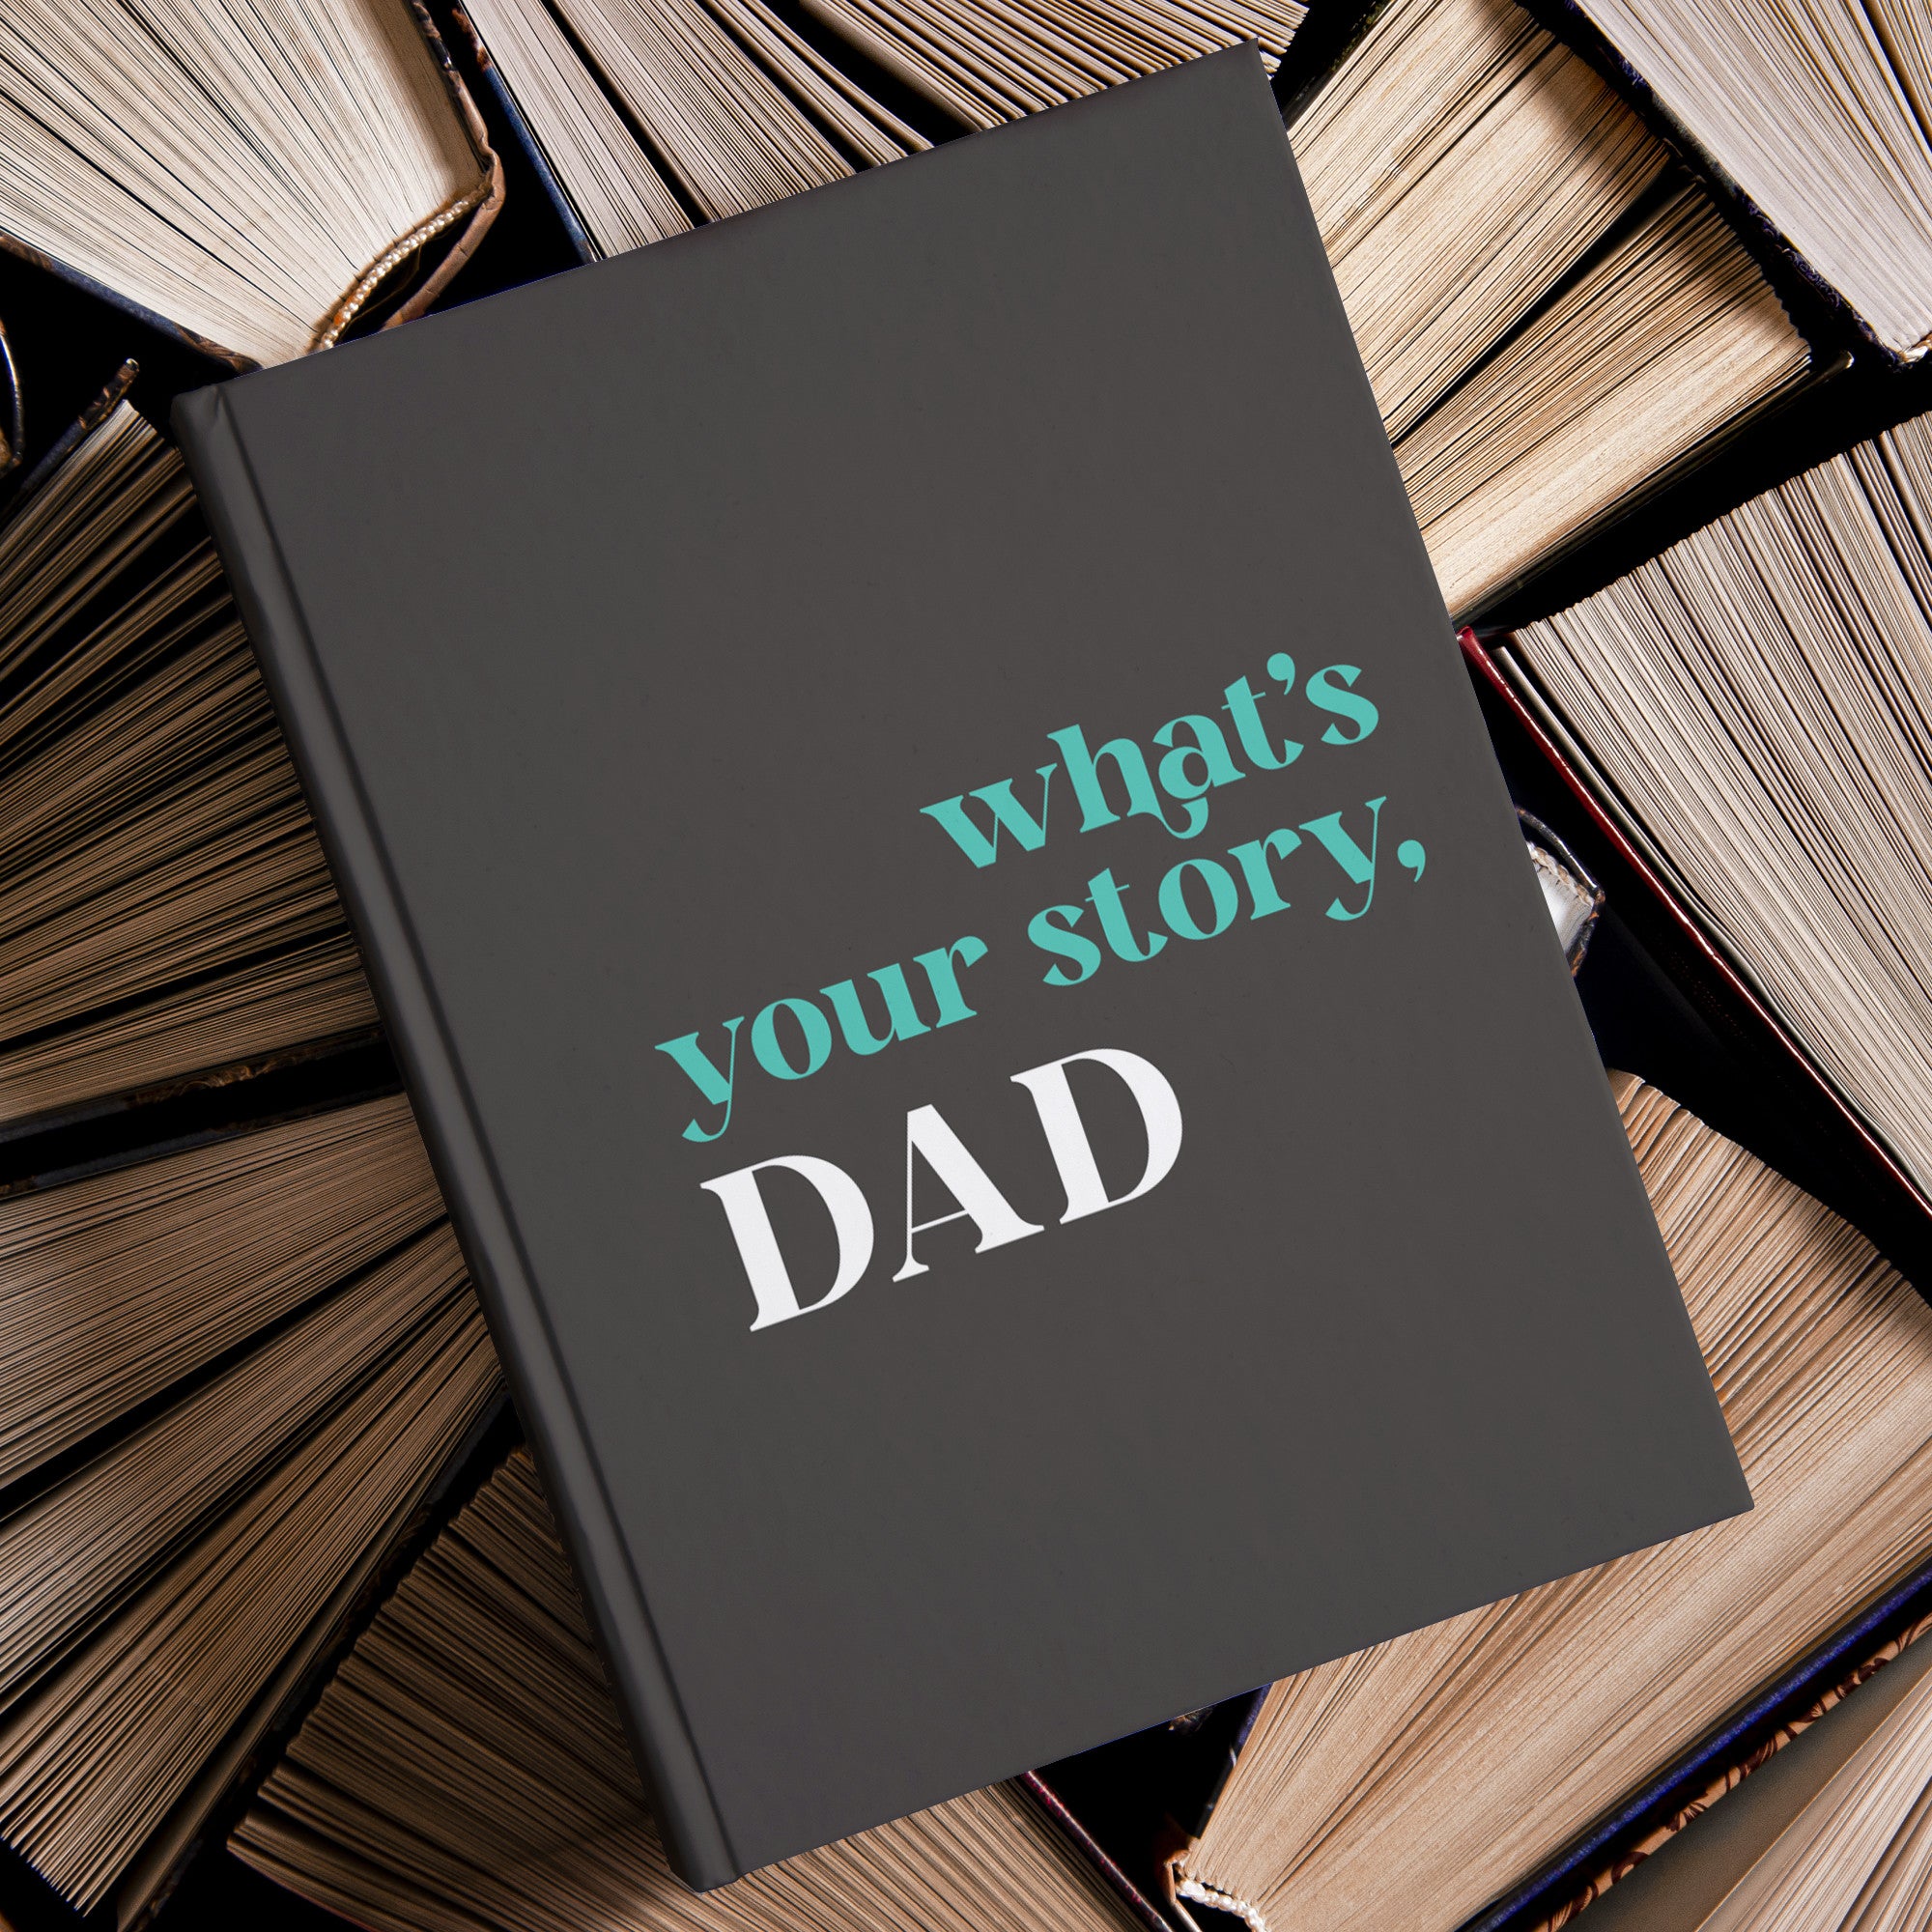 Share Your Story & Memories Personalized Journal